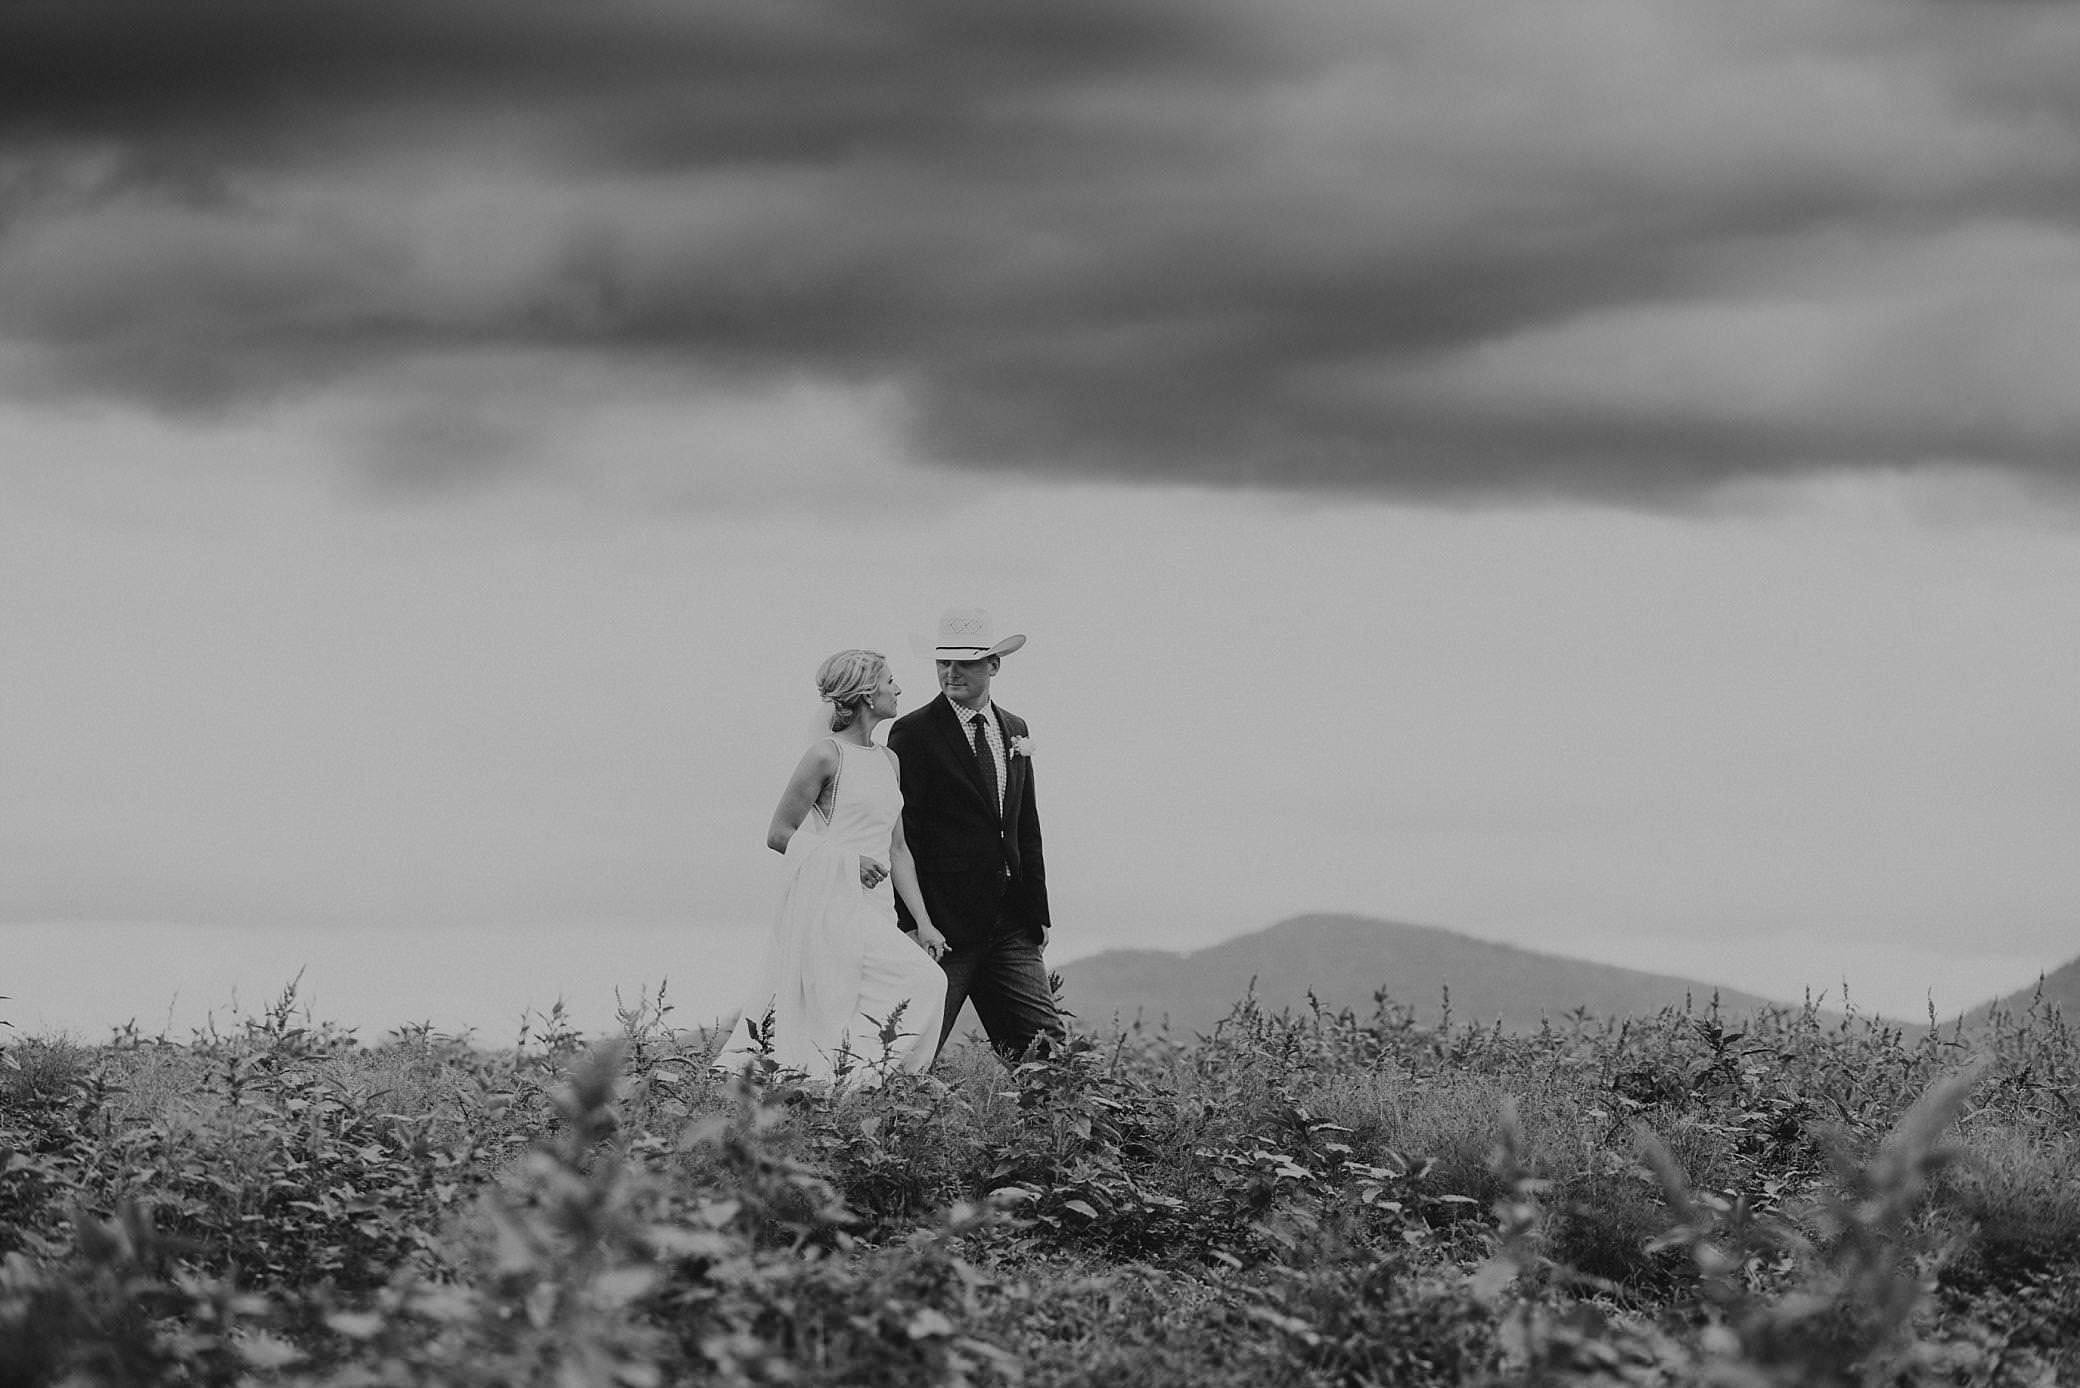 black and white photo the tamwoprth wedding photographer has captured the bride and groom with a cowboy hat walking with his bride in long grass.The bride is wearing a simple straight white wedding dress as she holds onto her husbands hand and her train. there is dark storm clouds